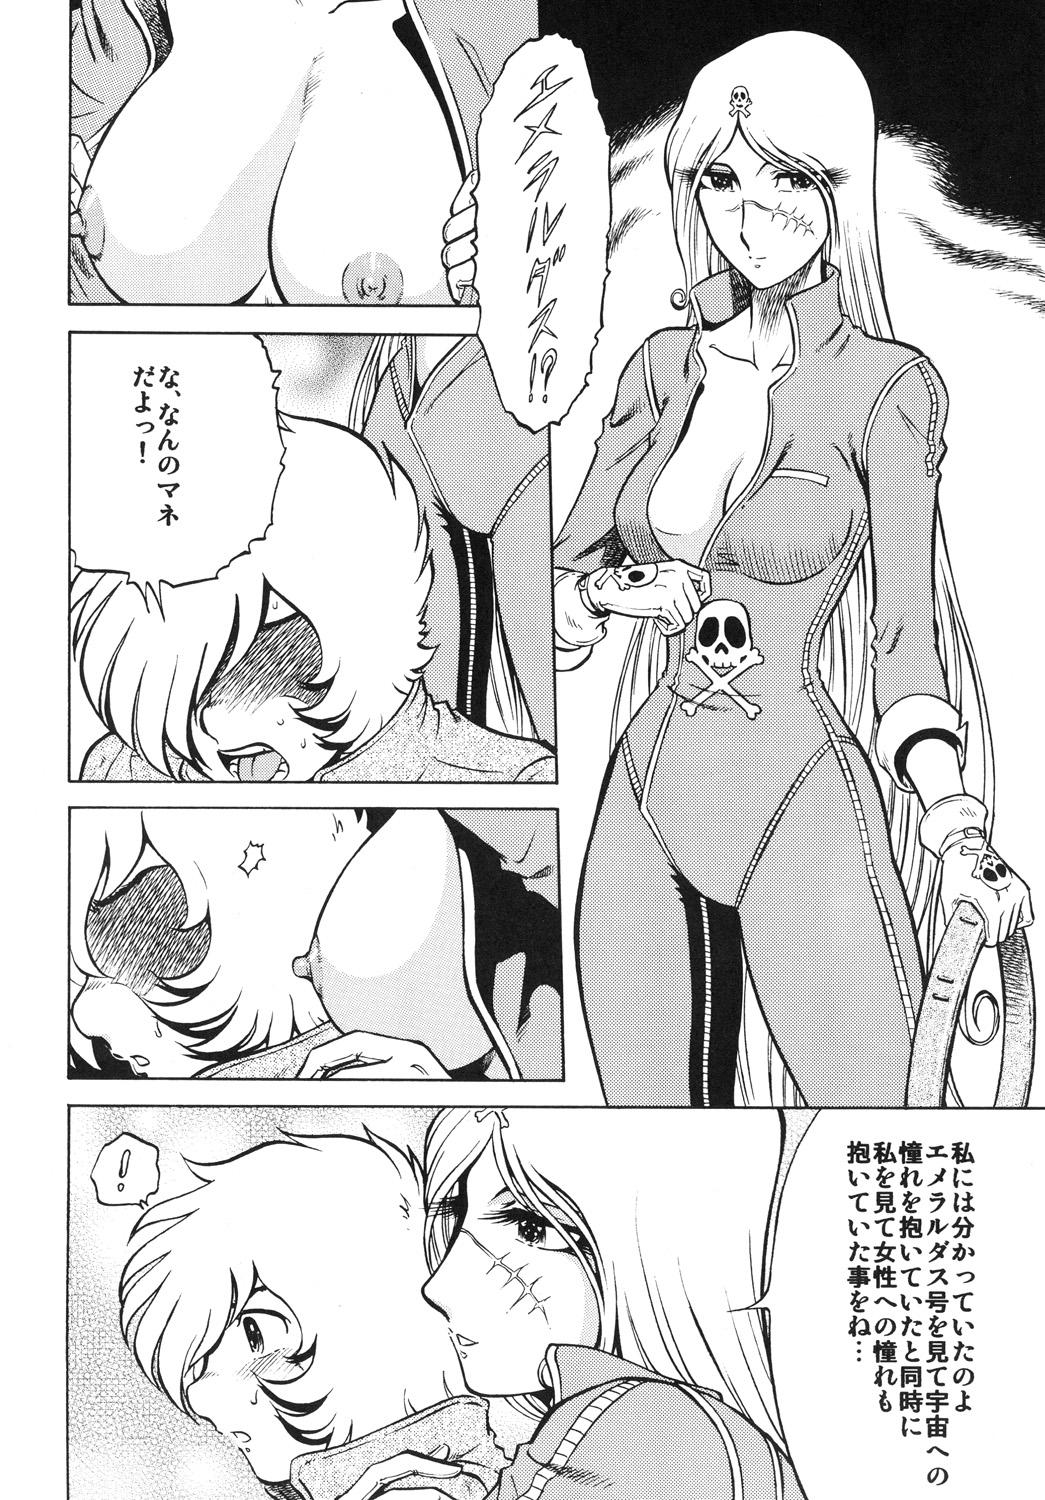 Pussy Fingering NightHead+2 - Space pirate captain harlock Playing - Page 9